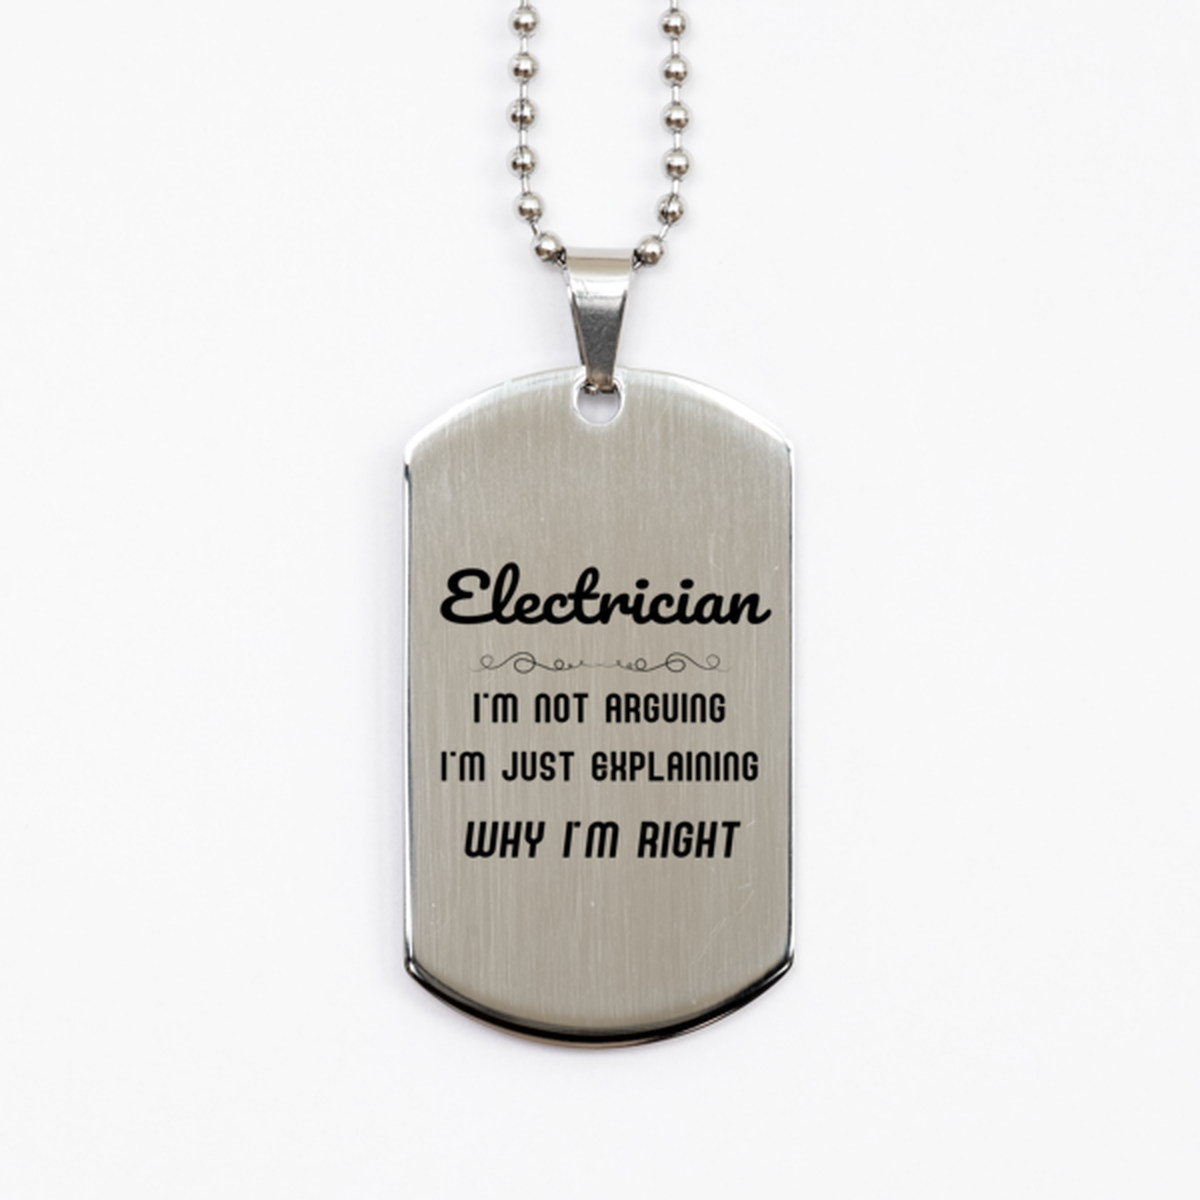 Electrician I'm not Arguing. I'm Just Explaining Why I'm RIGHT Silver Dog Tag, Funny Saying Quote Electrician Gifts For Electrician Graduation Birthday Christmas Gifts for Men Women Coworker